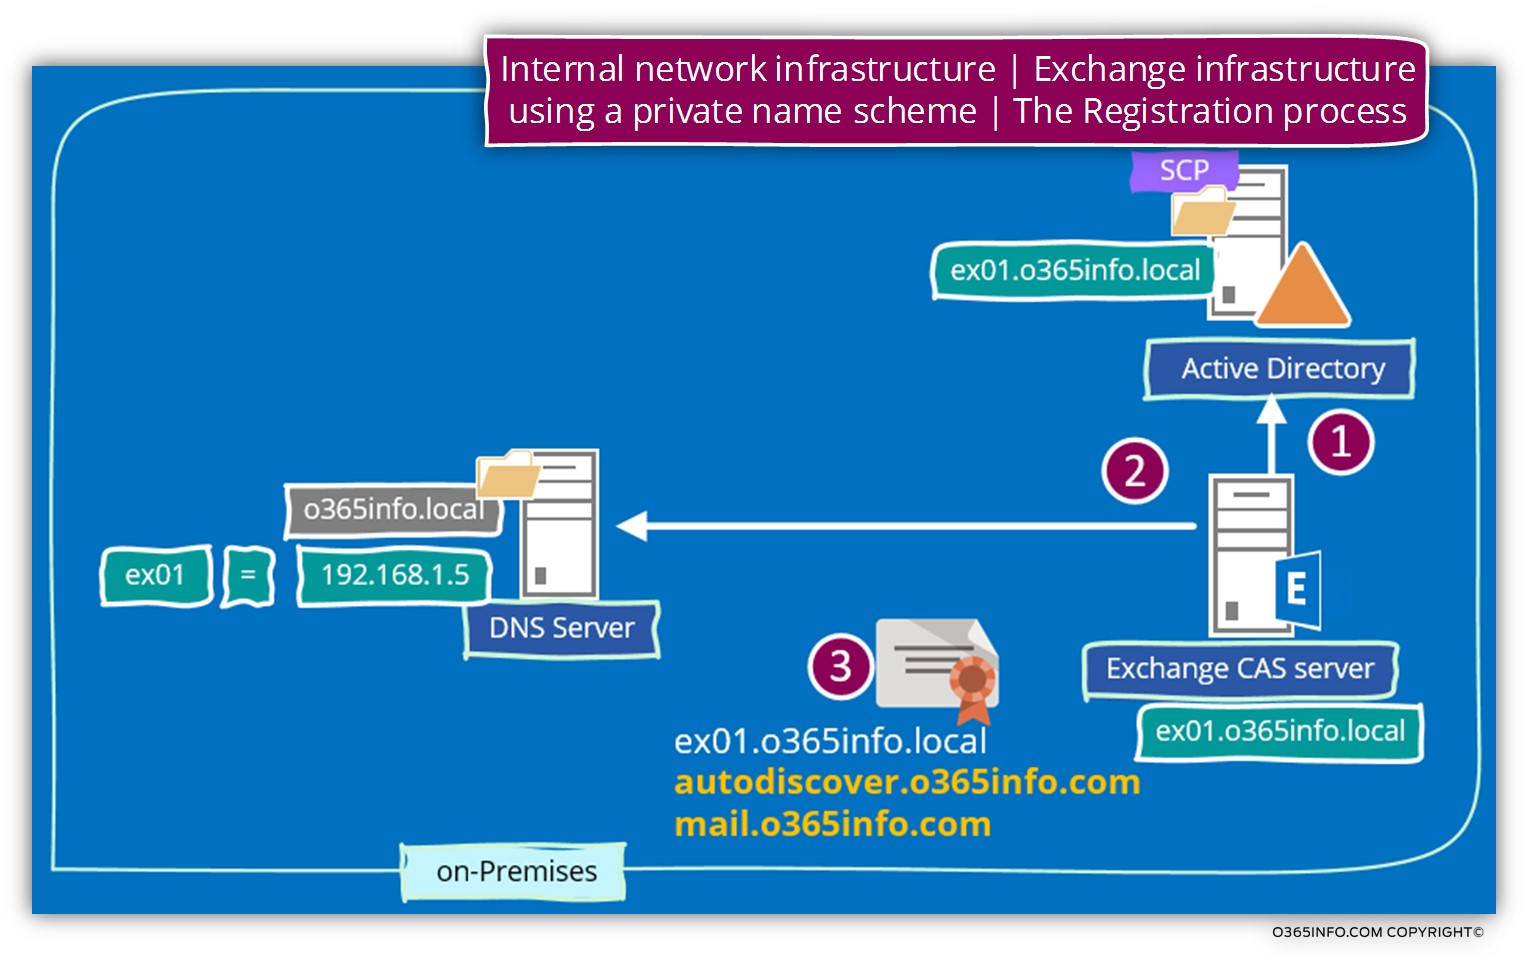 Internal network infrastructure - Exchange infrastructure using a private name scheme - The Registration process